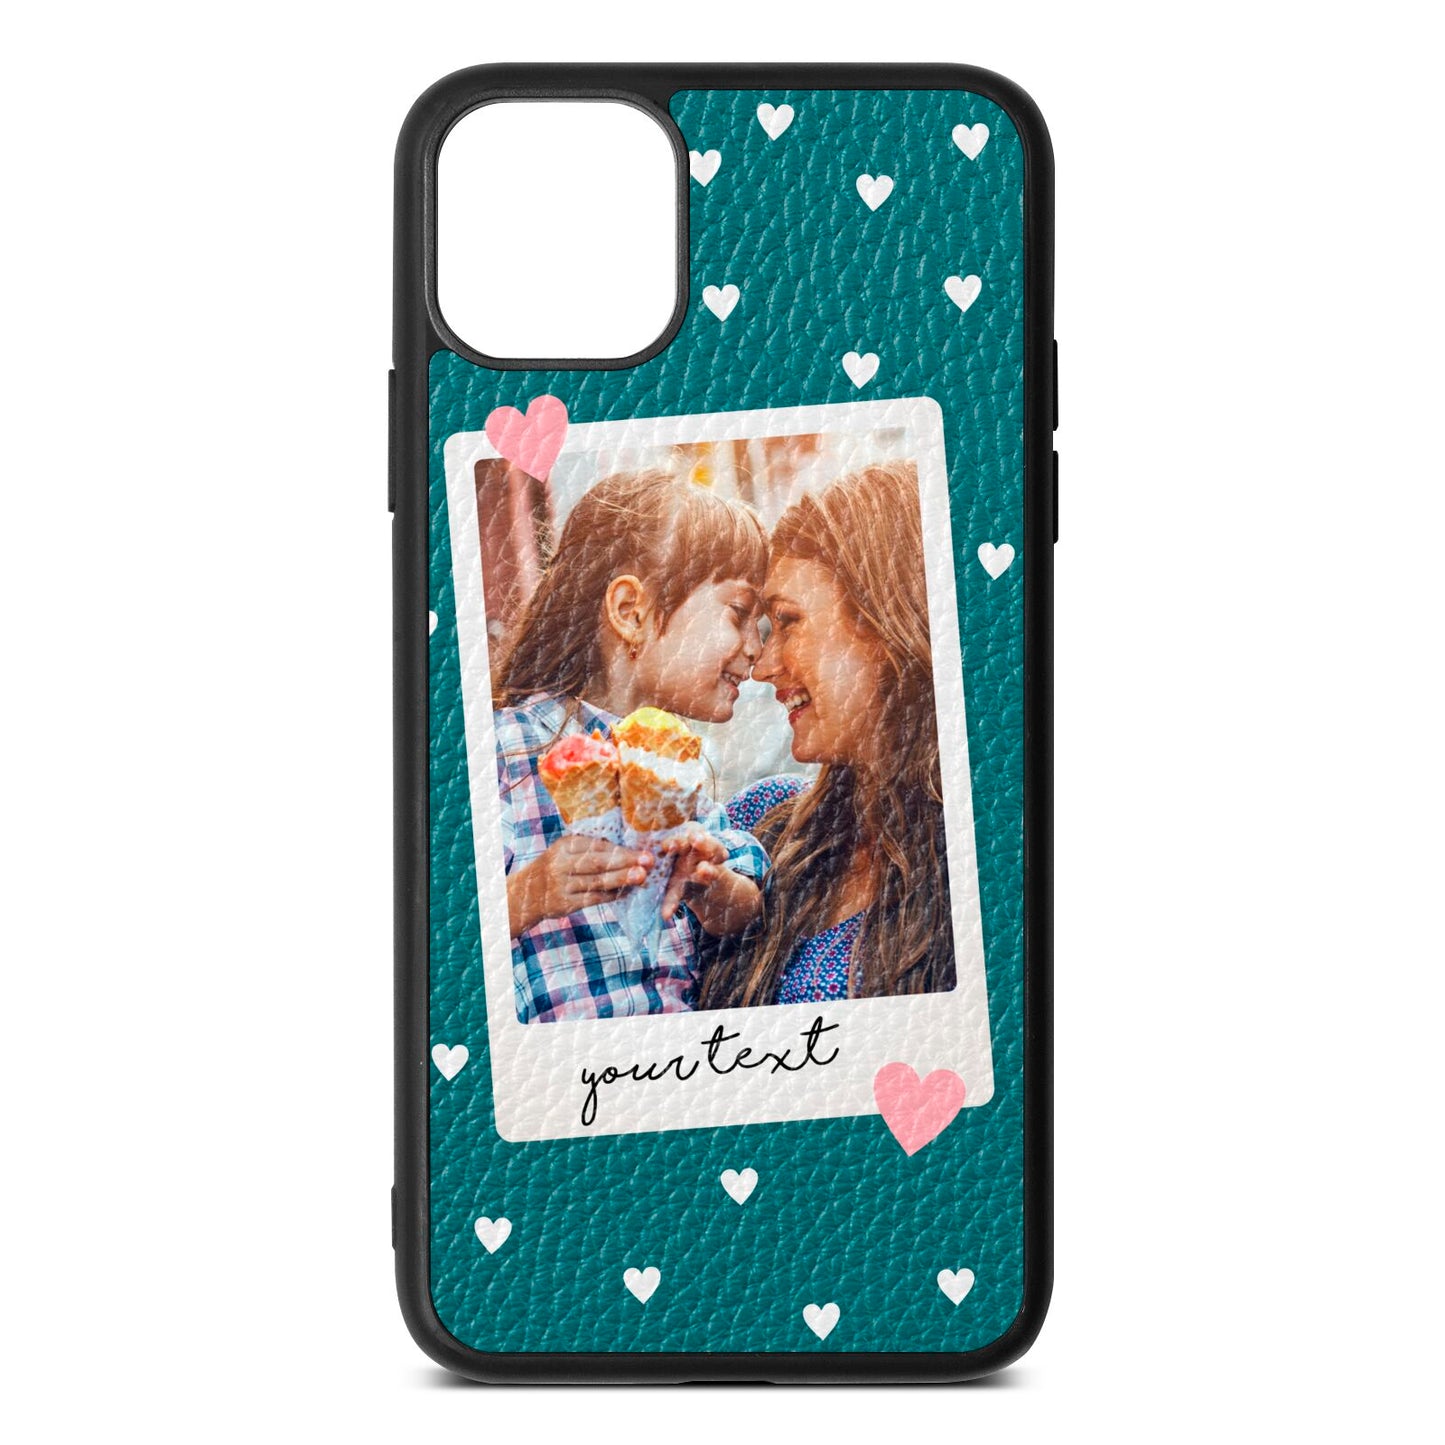 Personalised Photo Love Hearts Green Pebble Leather iPhone 11 Pro Max Case